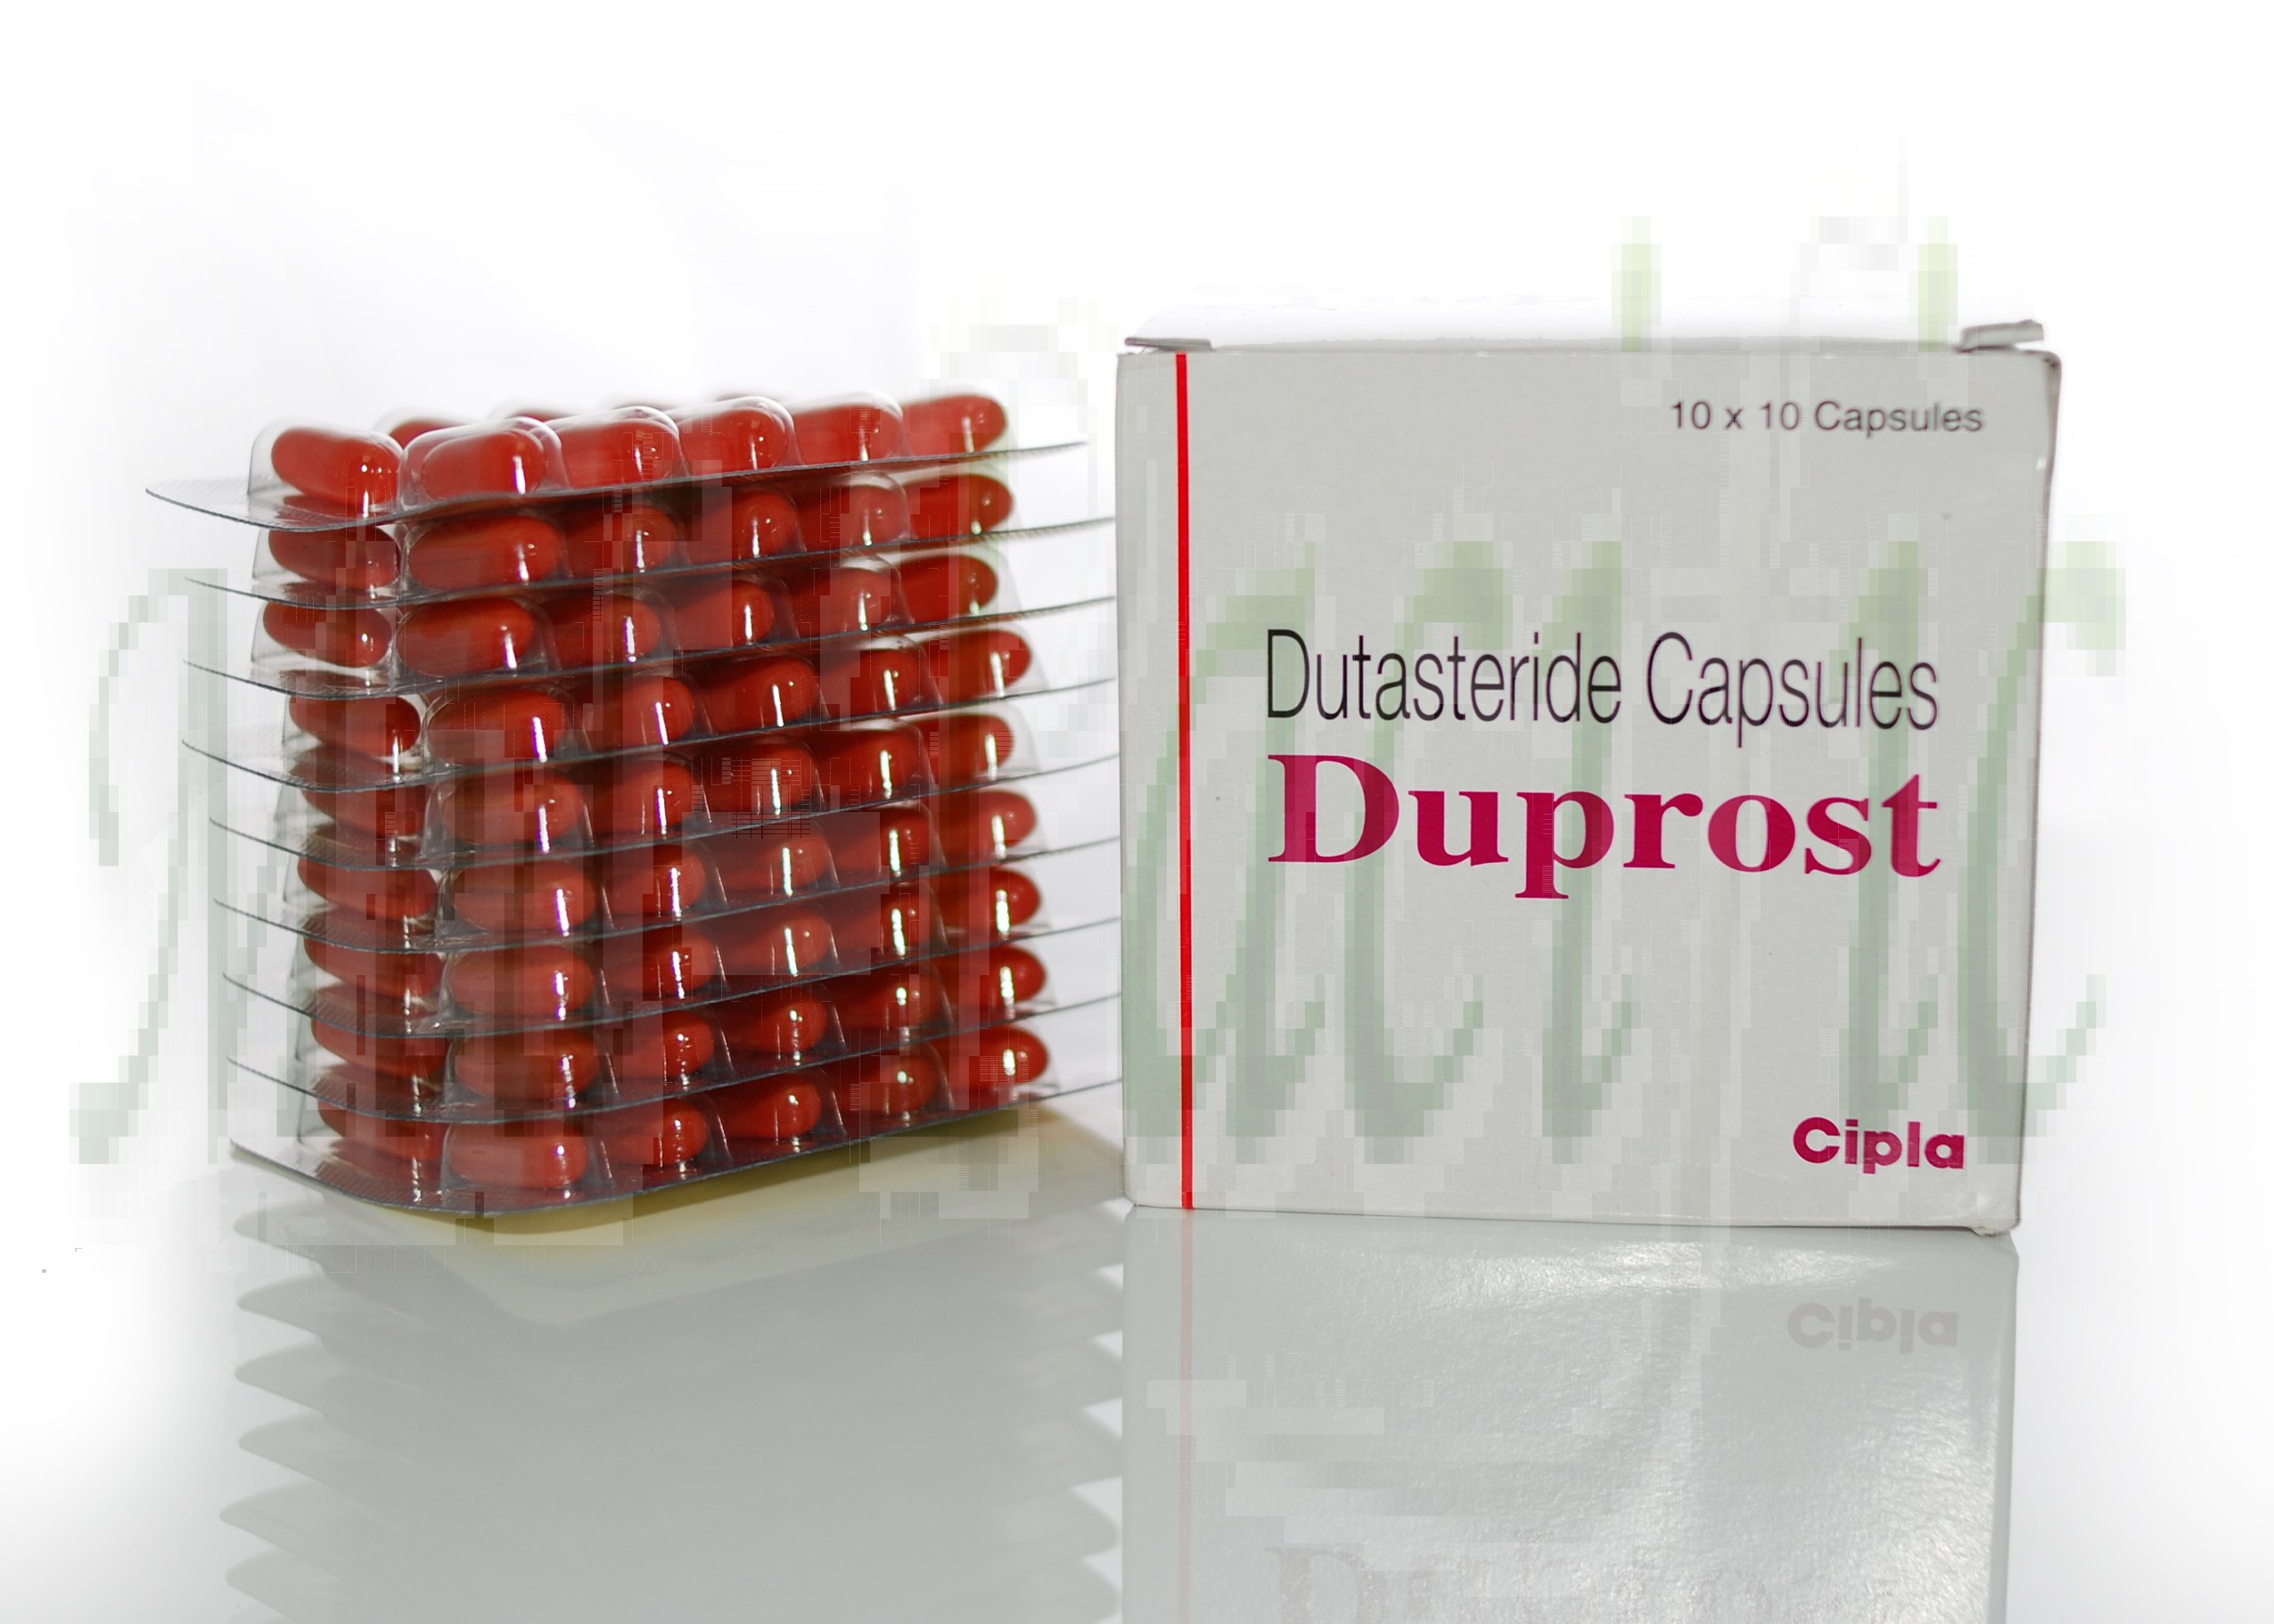 Duprost 0.5mg - 10 Capsules